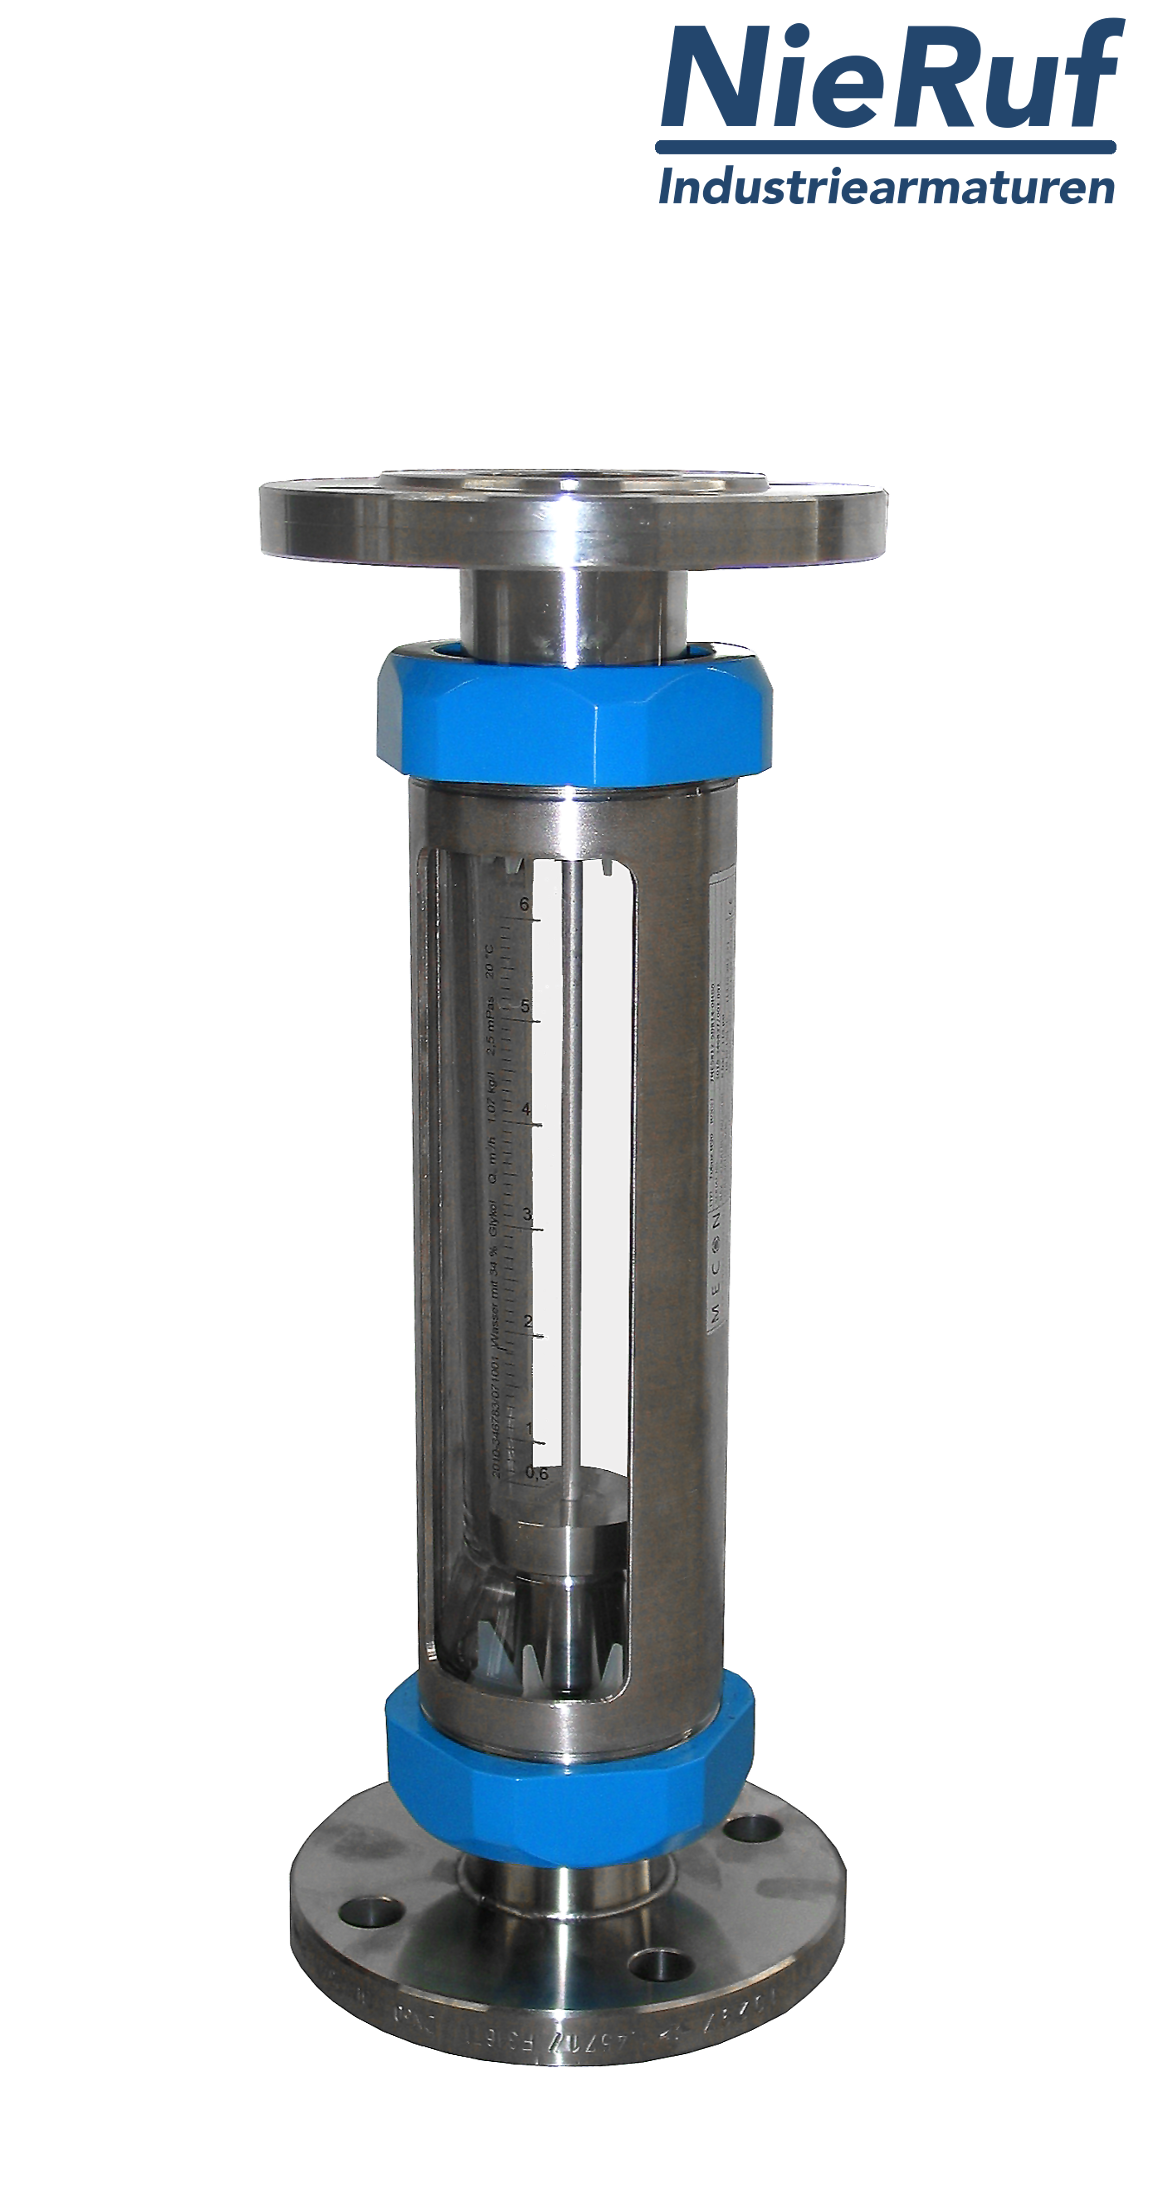 Variable area flowmeter stainless steel + borosilicate flange DN80 1000.0 - 10000 l/h water FKM